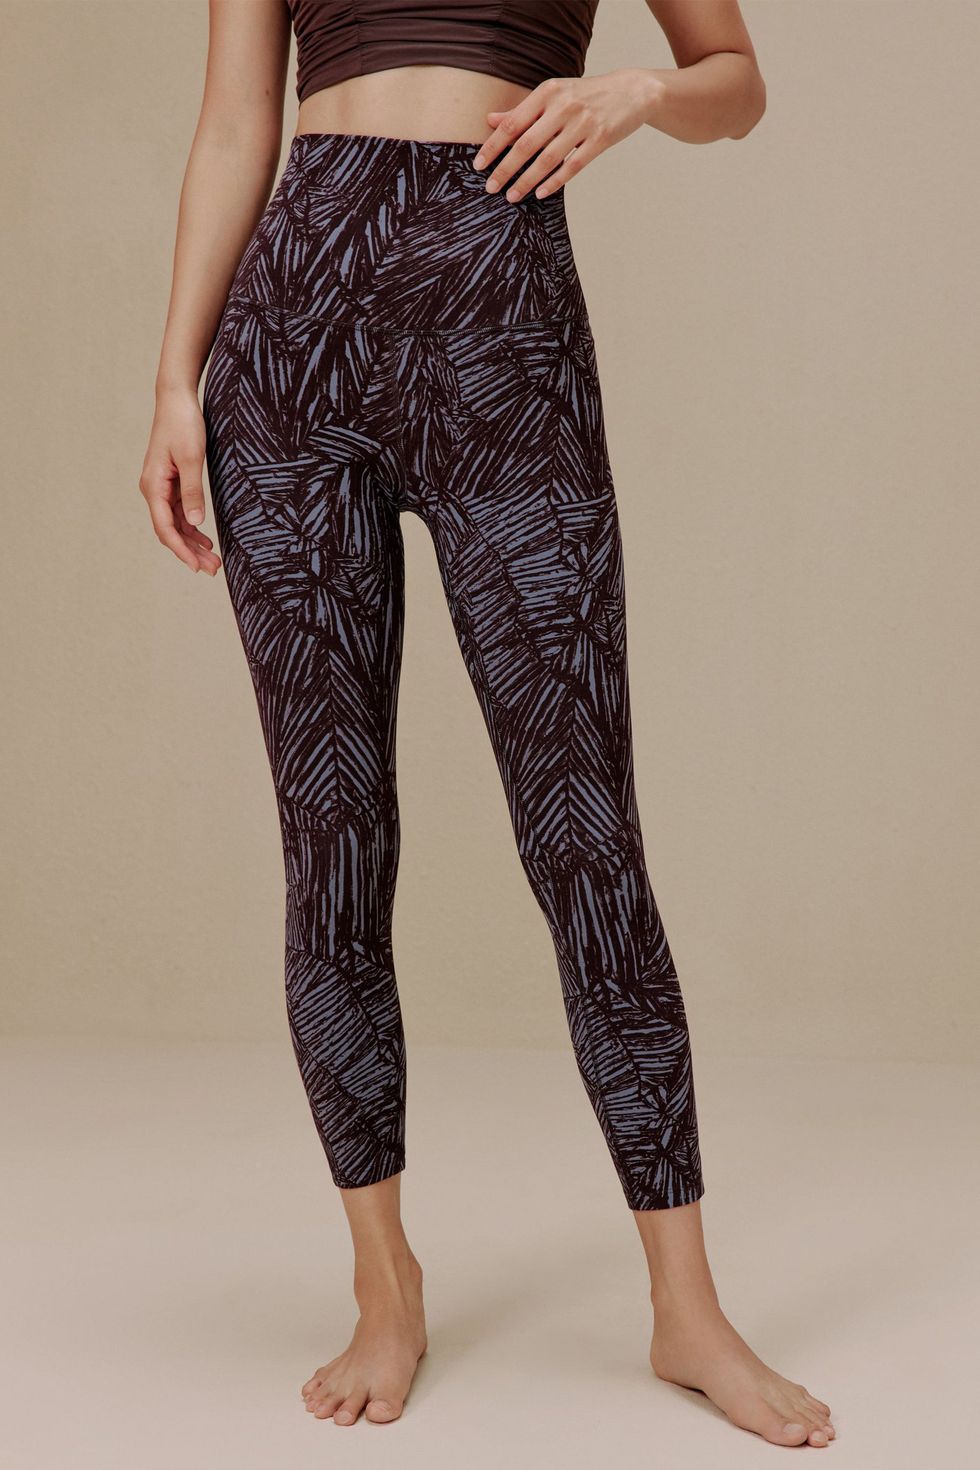 High Waisted Legging With Pockets Made of Heavy Organic Cotton With  Spandex, Wide Waistband is Doubled 